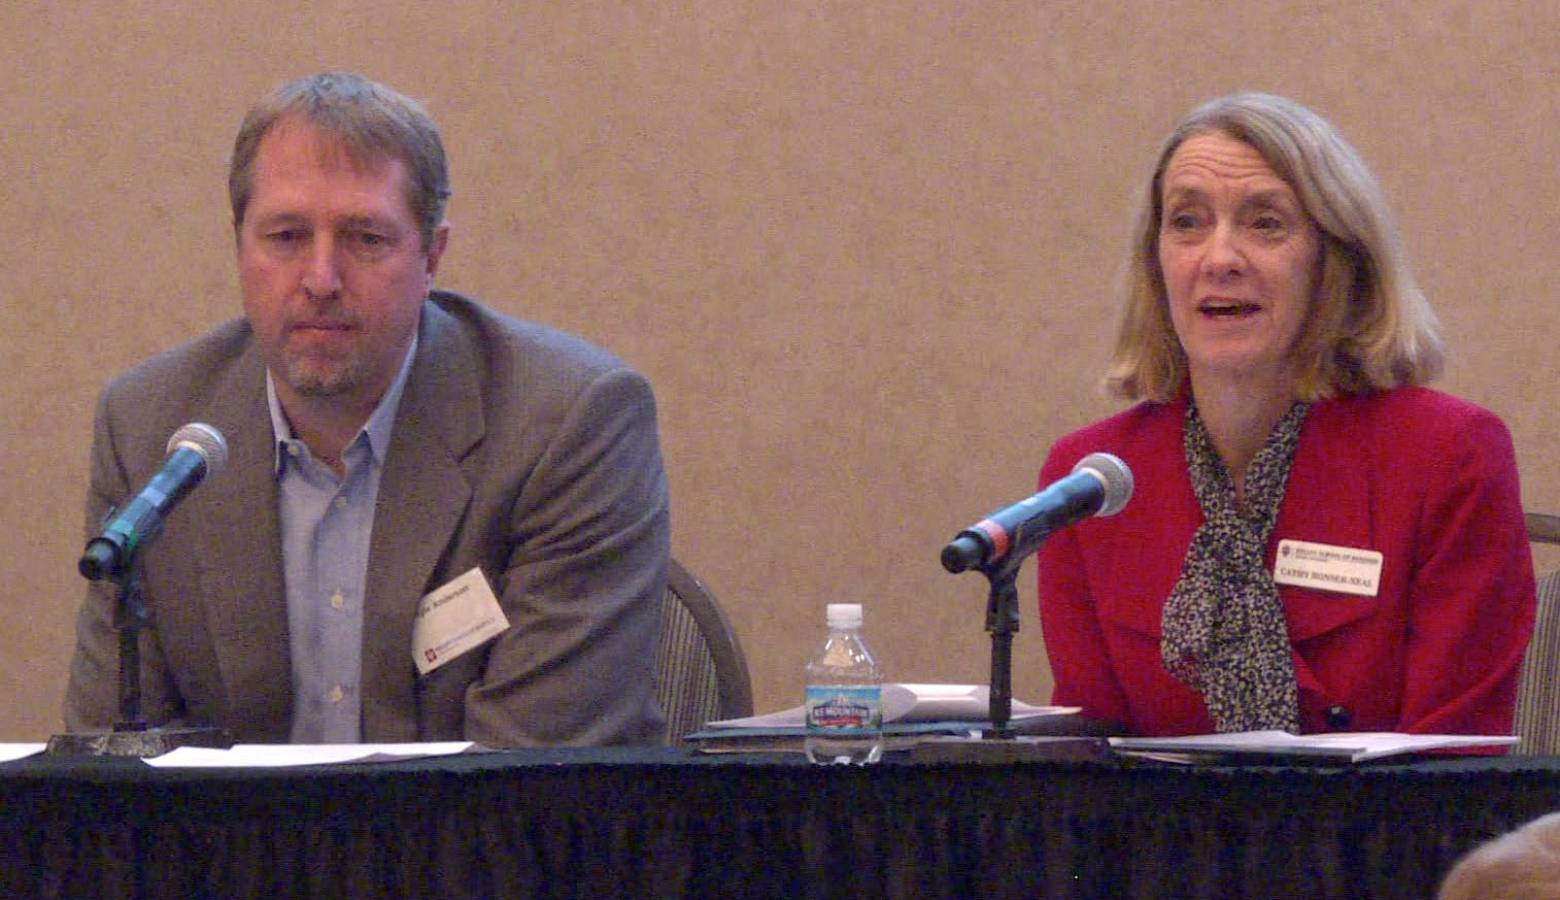 Kelley School of Business professors Kyle Anderson and Cathy Bonser-Neal speak on the 2020 economic forecast panel at IUPUI Thursday morning. (Samantha Horton/IPB News)